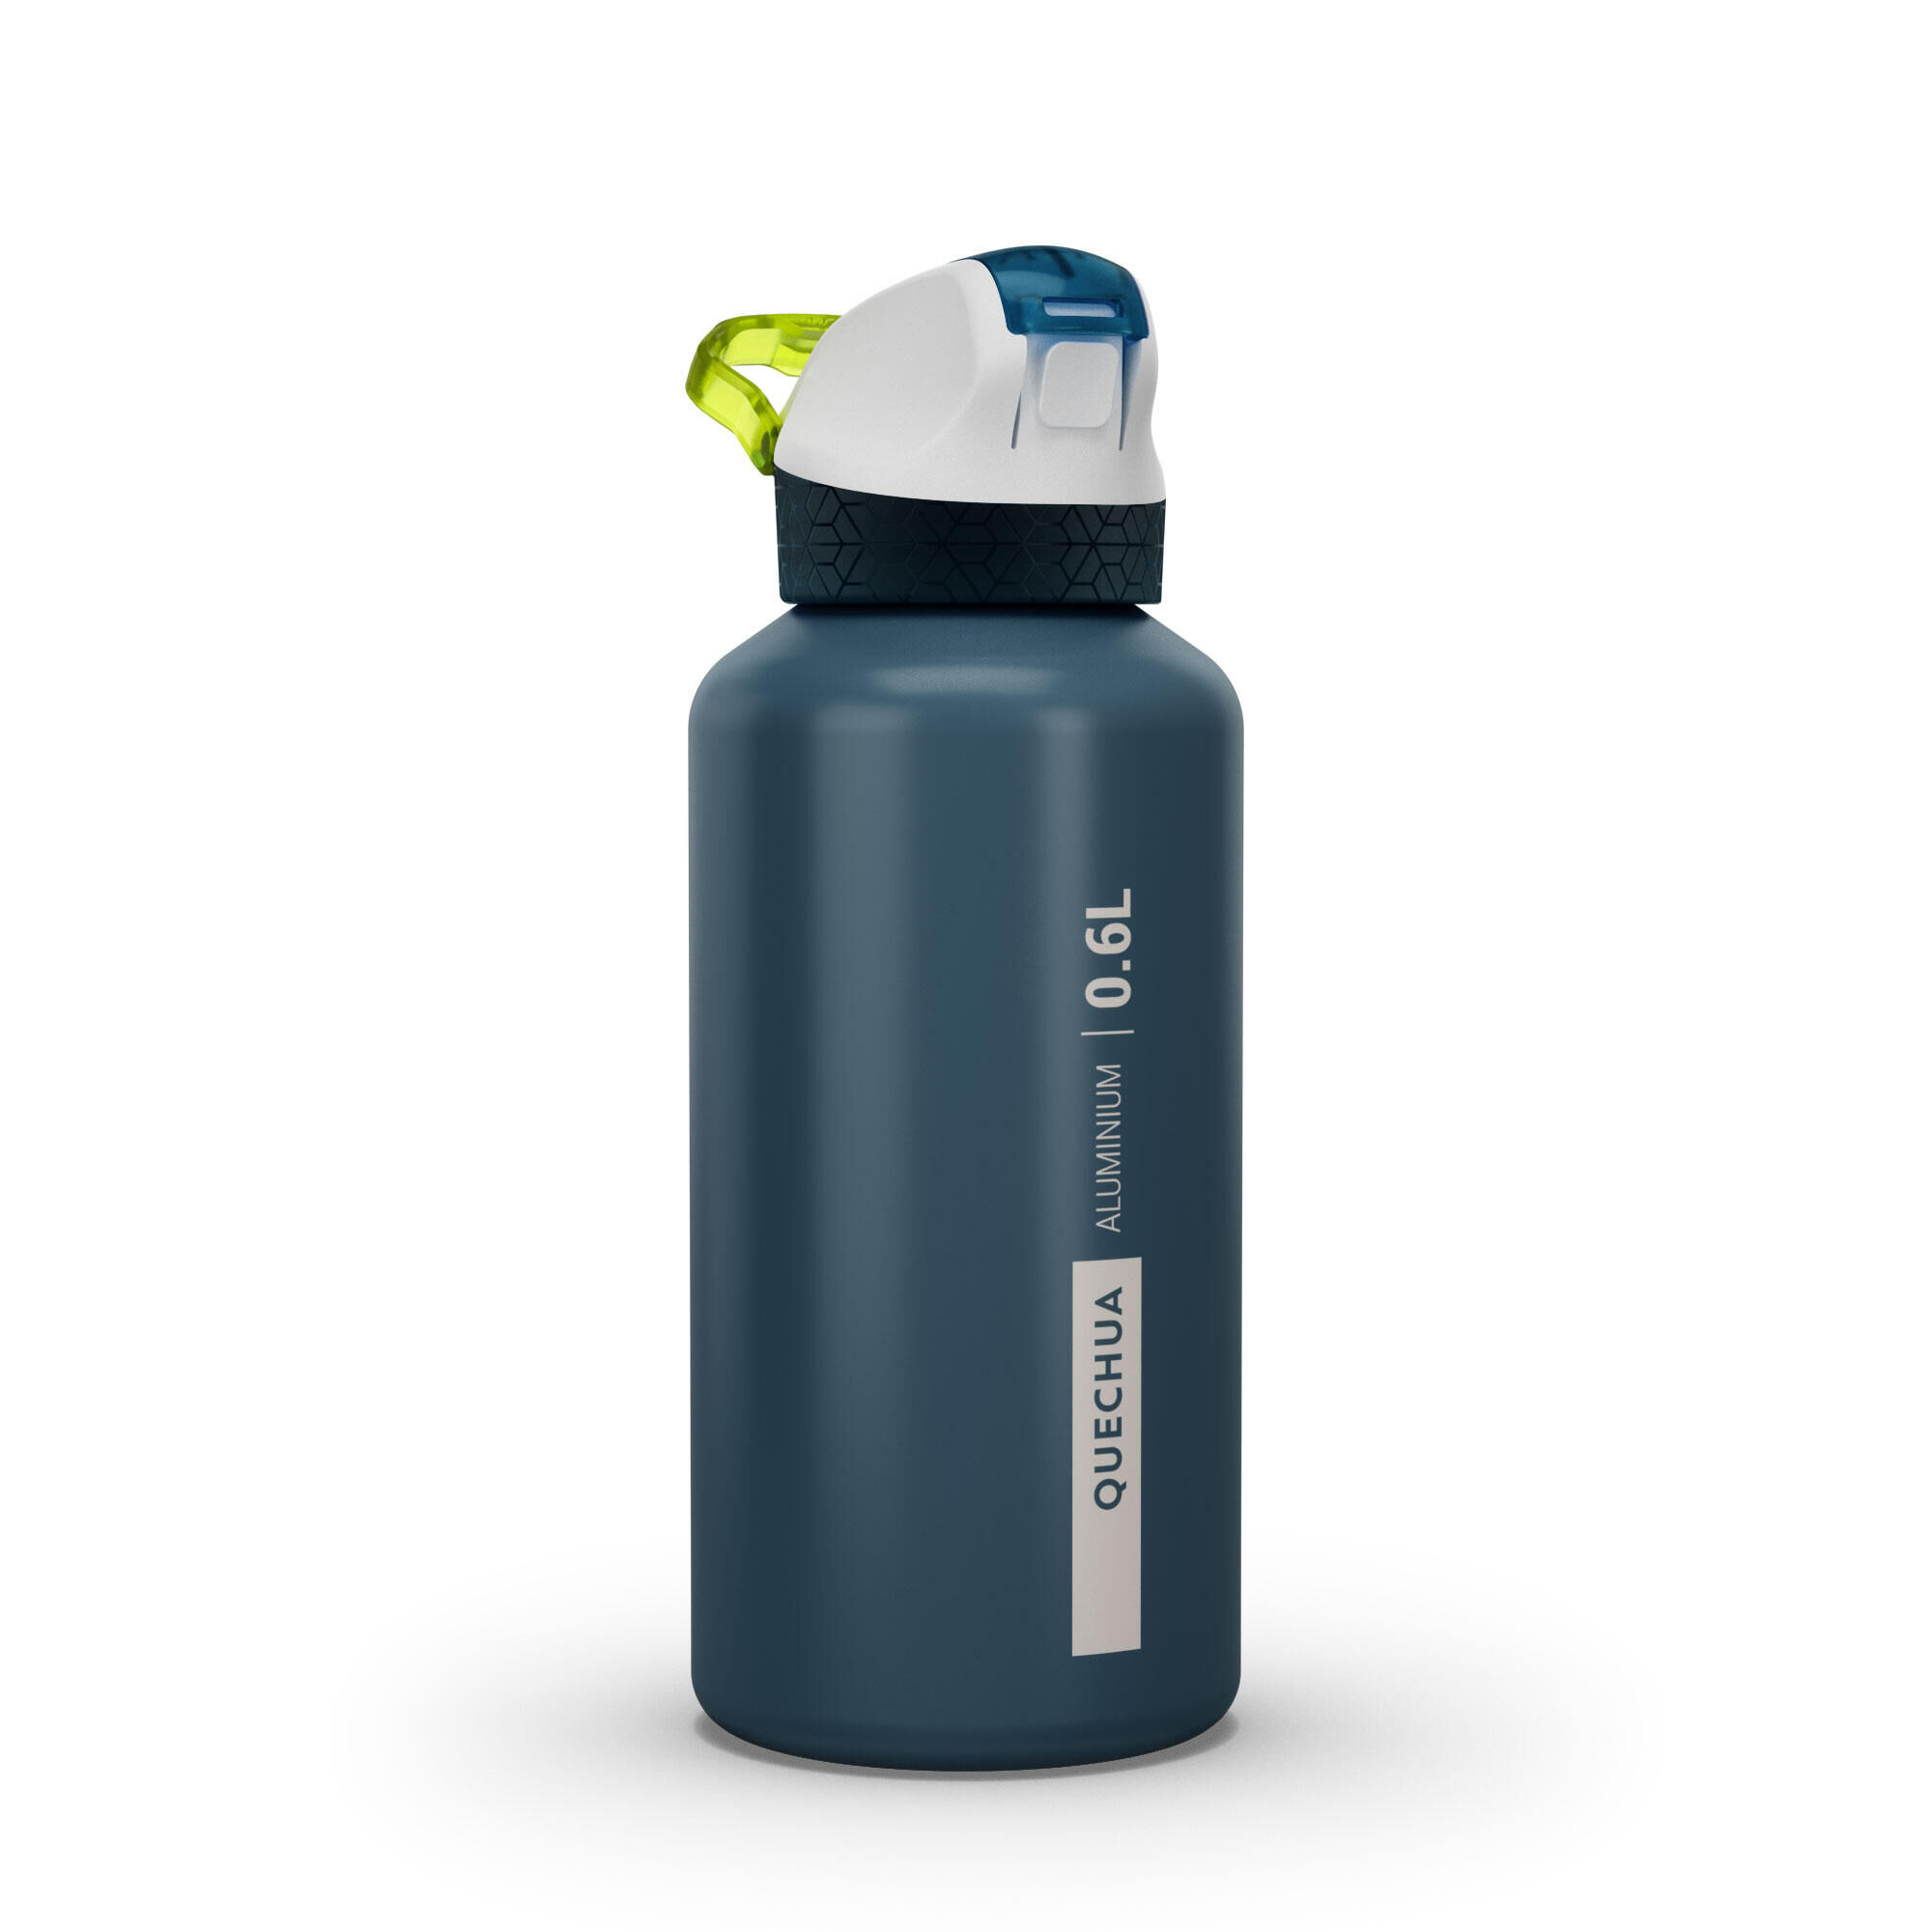 QUECHUA 0.6 L Aluminium flask with quick opening cap and pipette for hiking